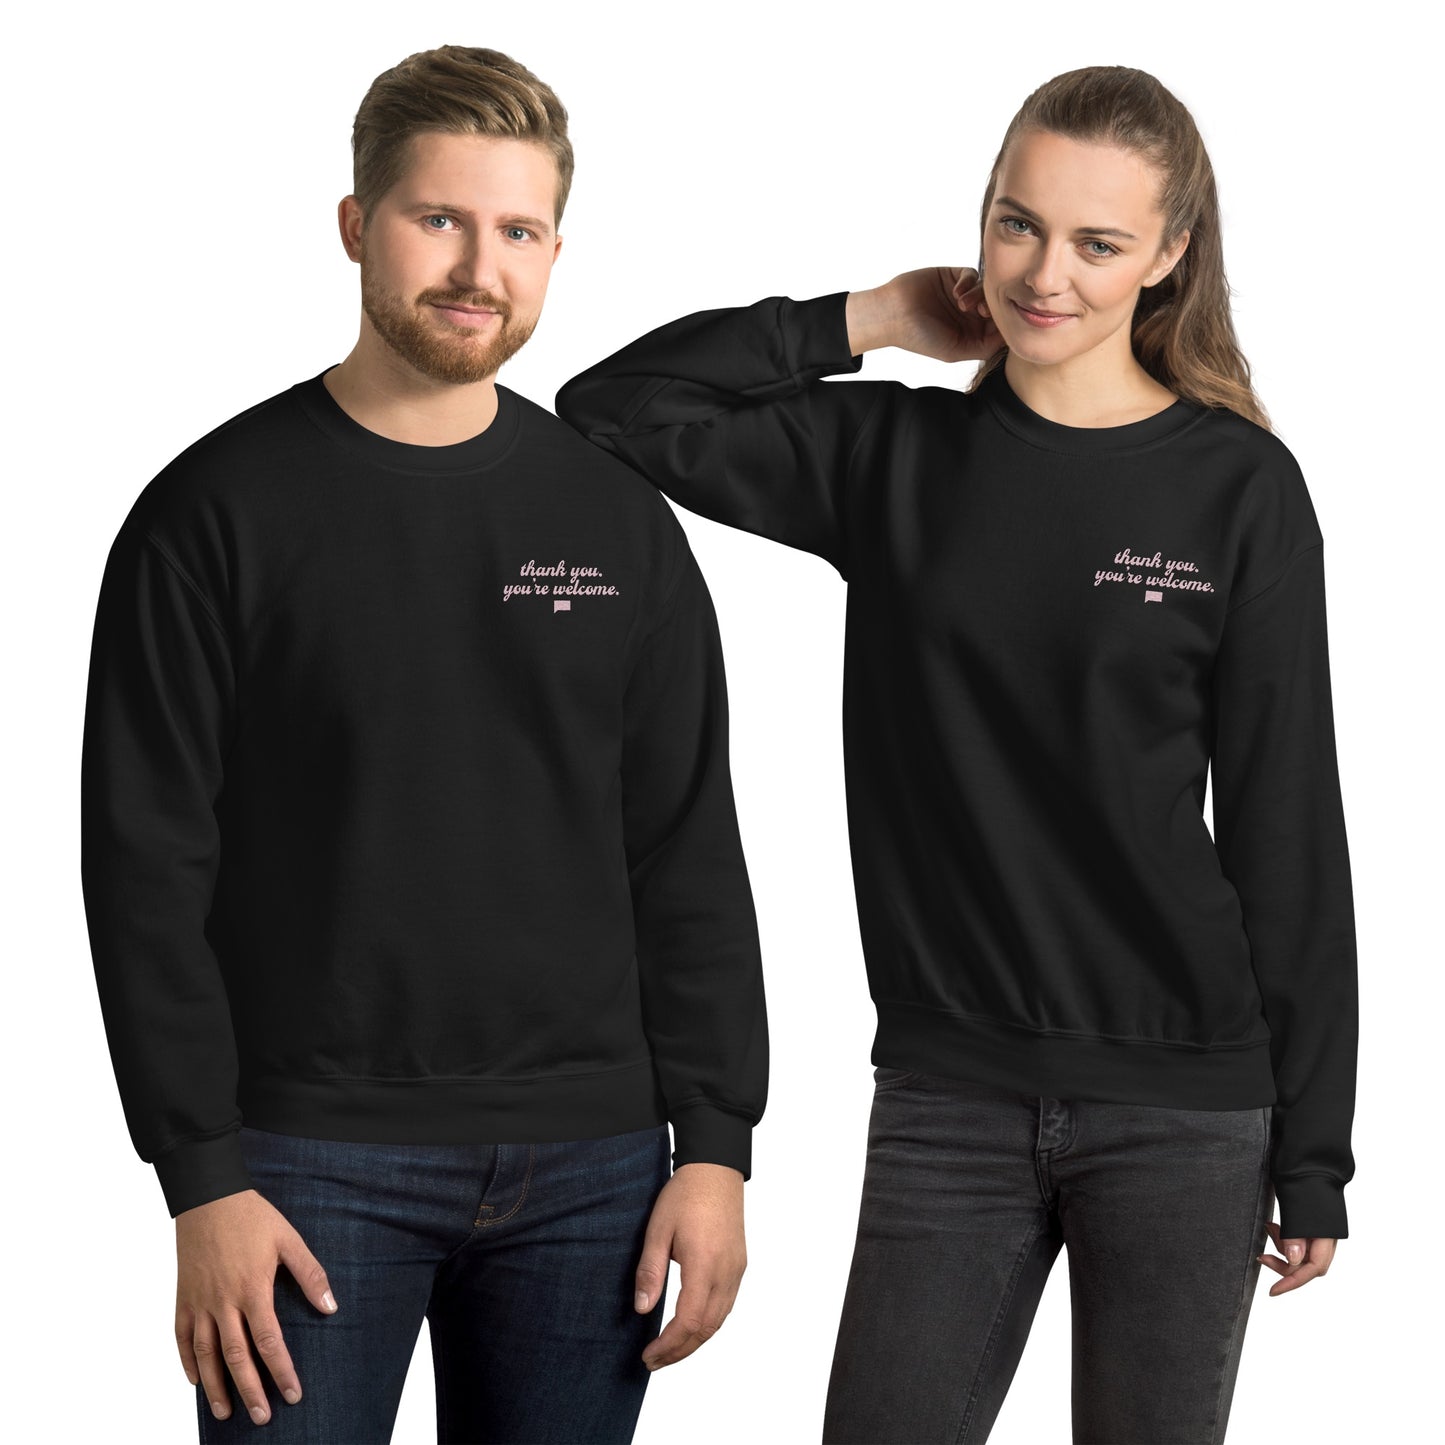 The Real Housewives of Beverly Hills Thank You, You're Welcome Embroidered Crewneck